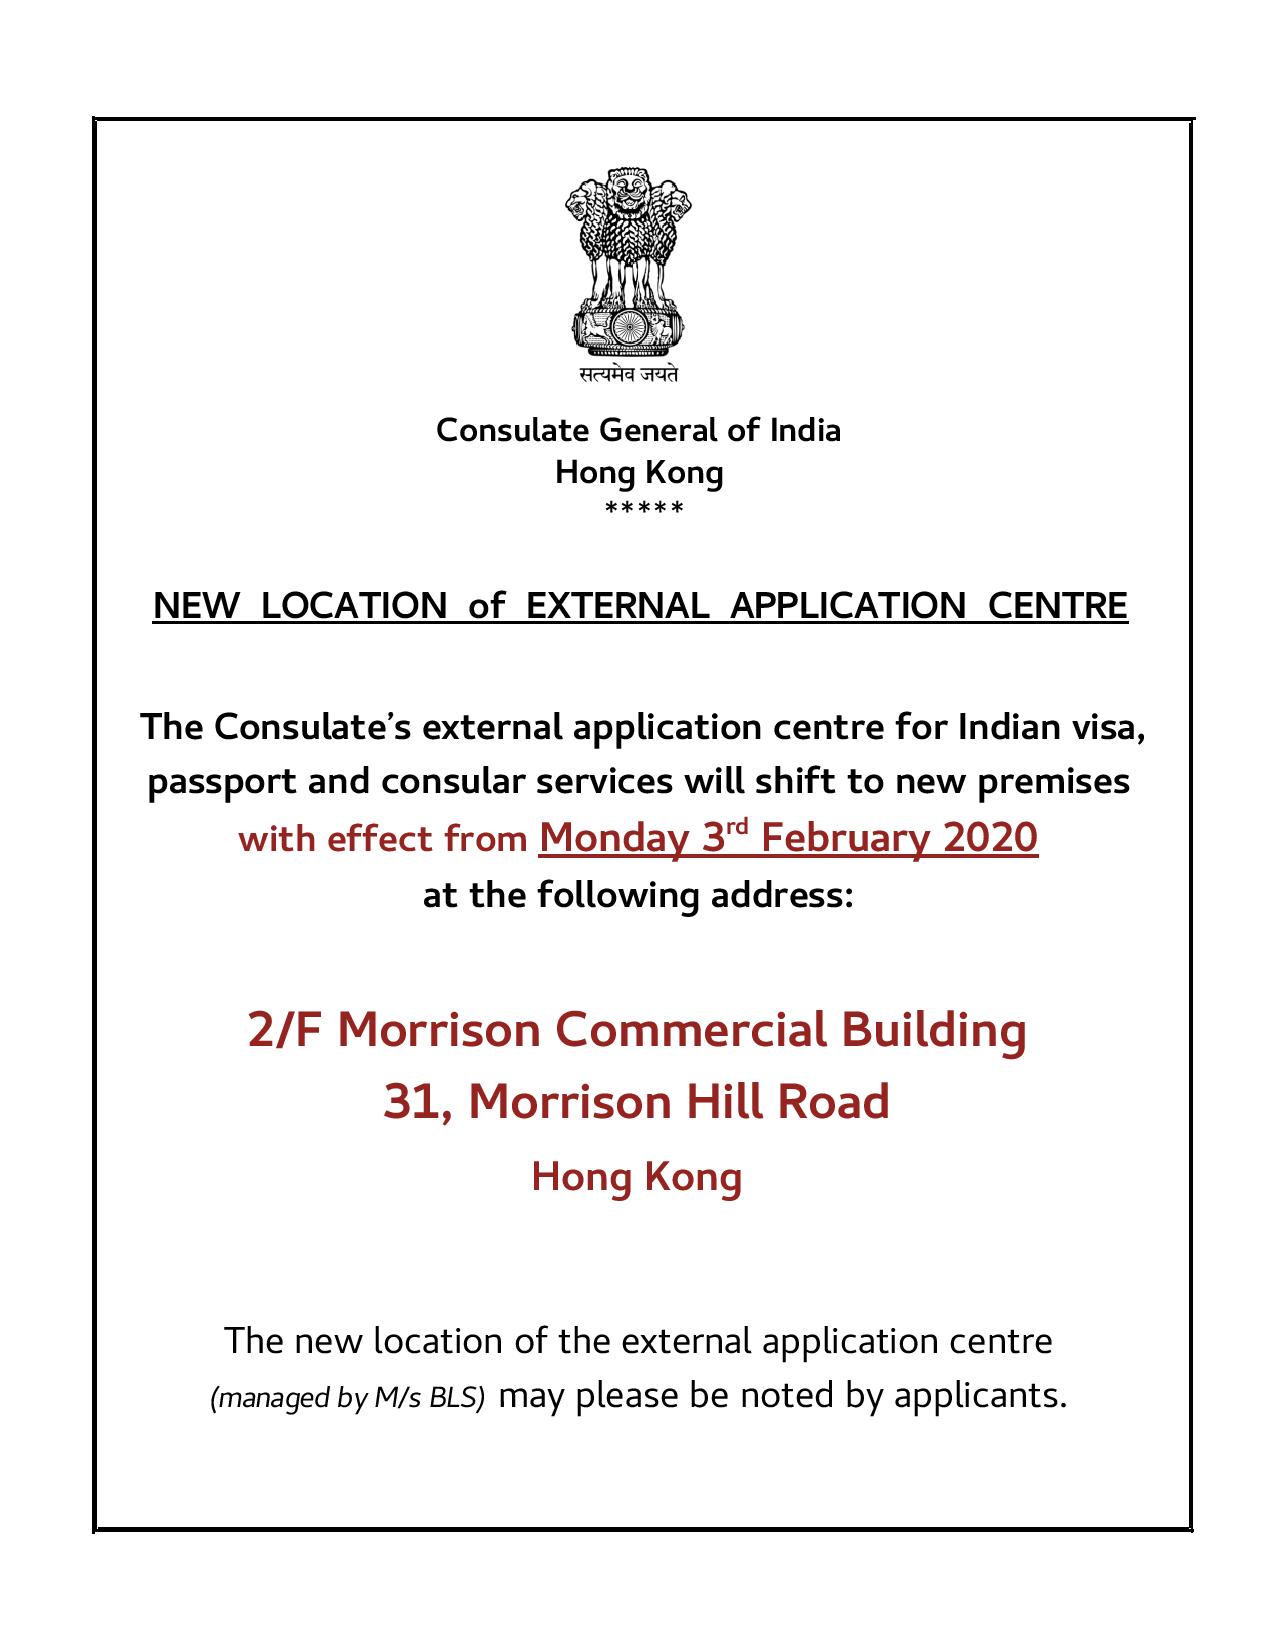 New location of external application centre